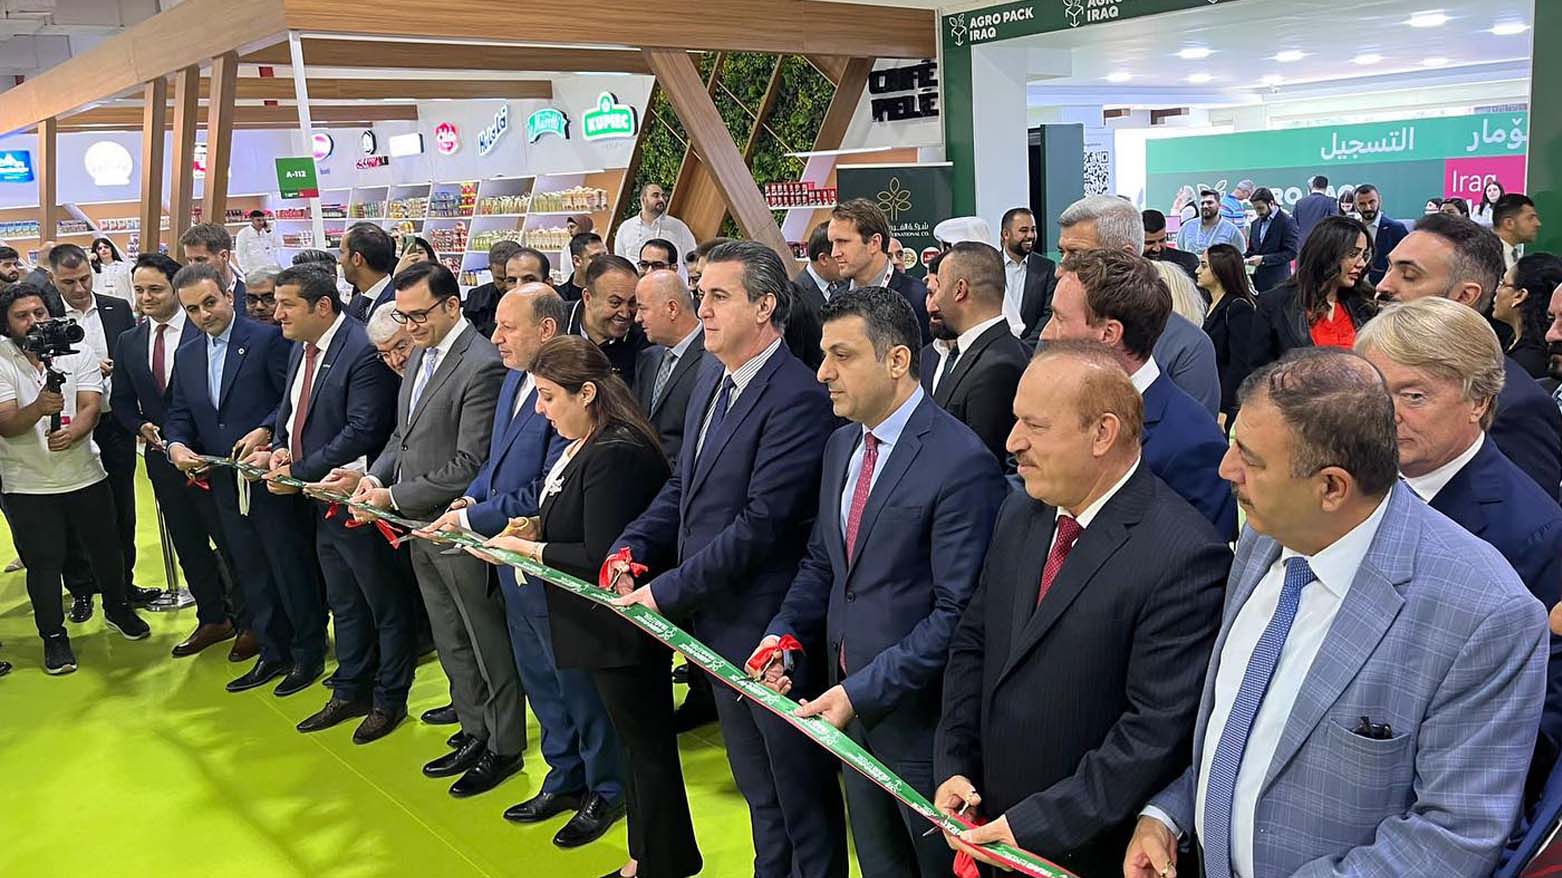 KRG officials, diplomats, and company representatives are pictured inaugurating the 2023 Agro Pack expo in Erbil, Sept. 19, 2023. (Photo: Agro Pack/Facebook)